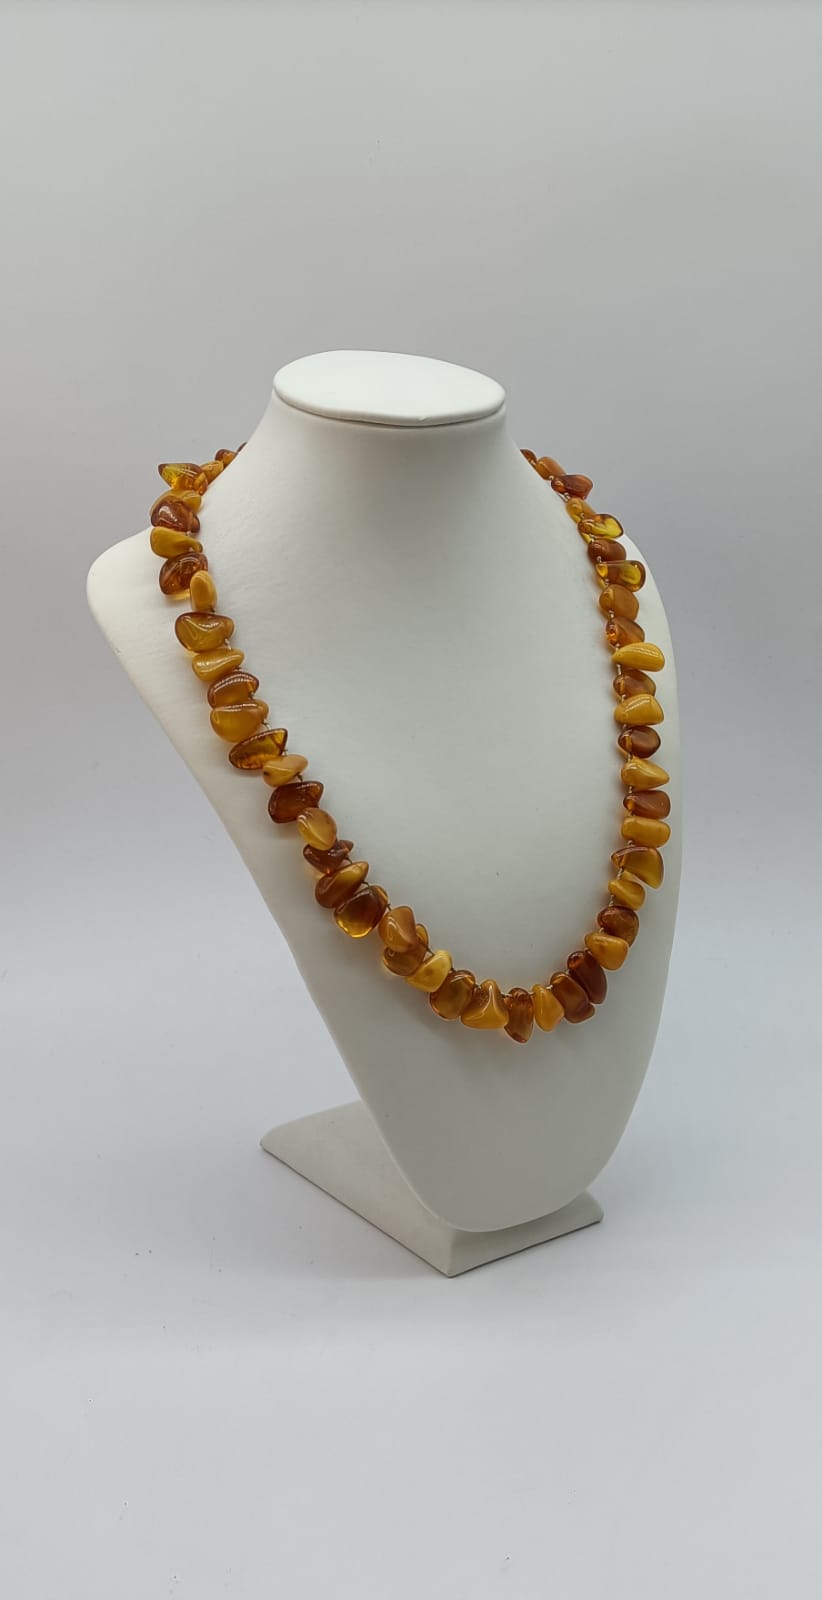 ﻿Baltic Amber Necklace